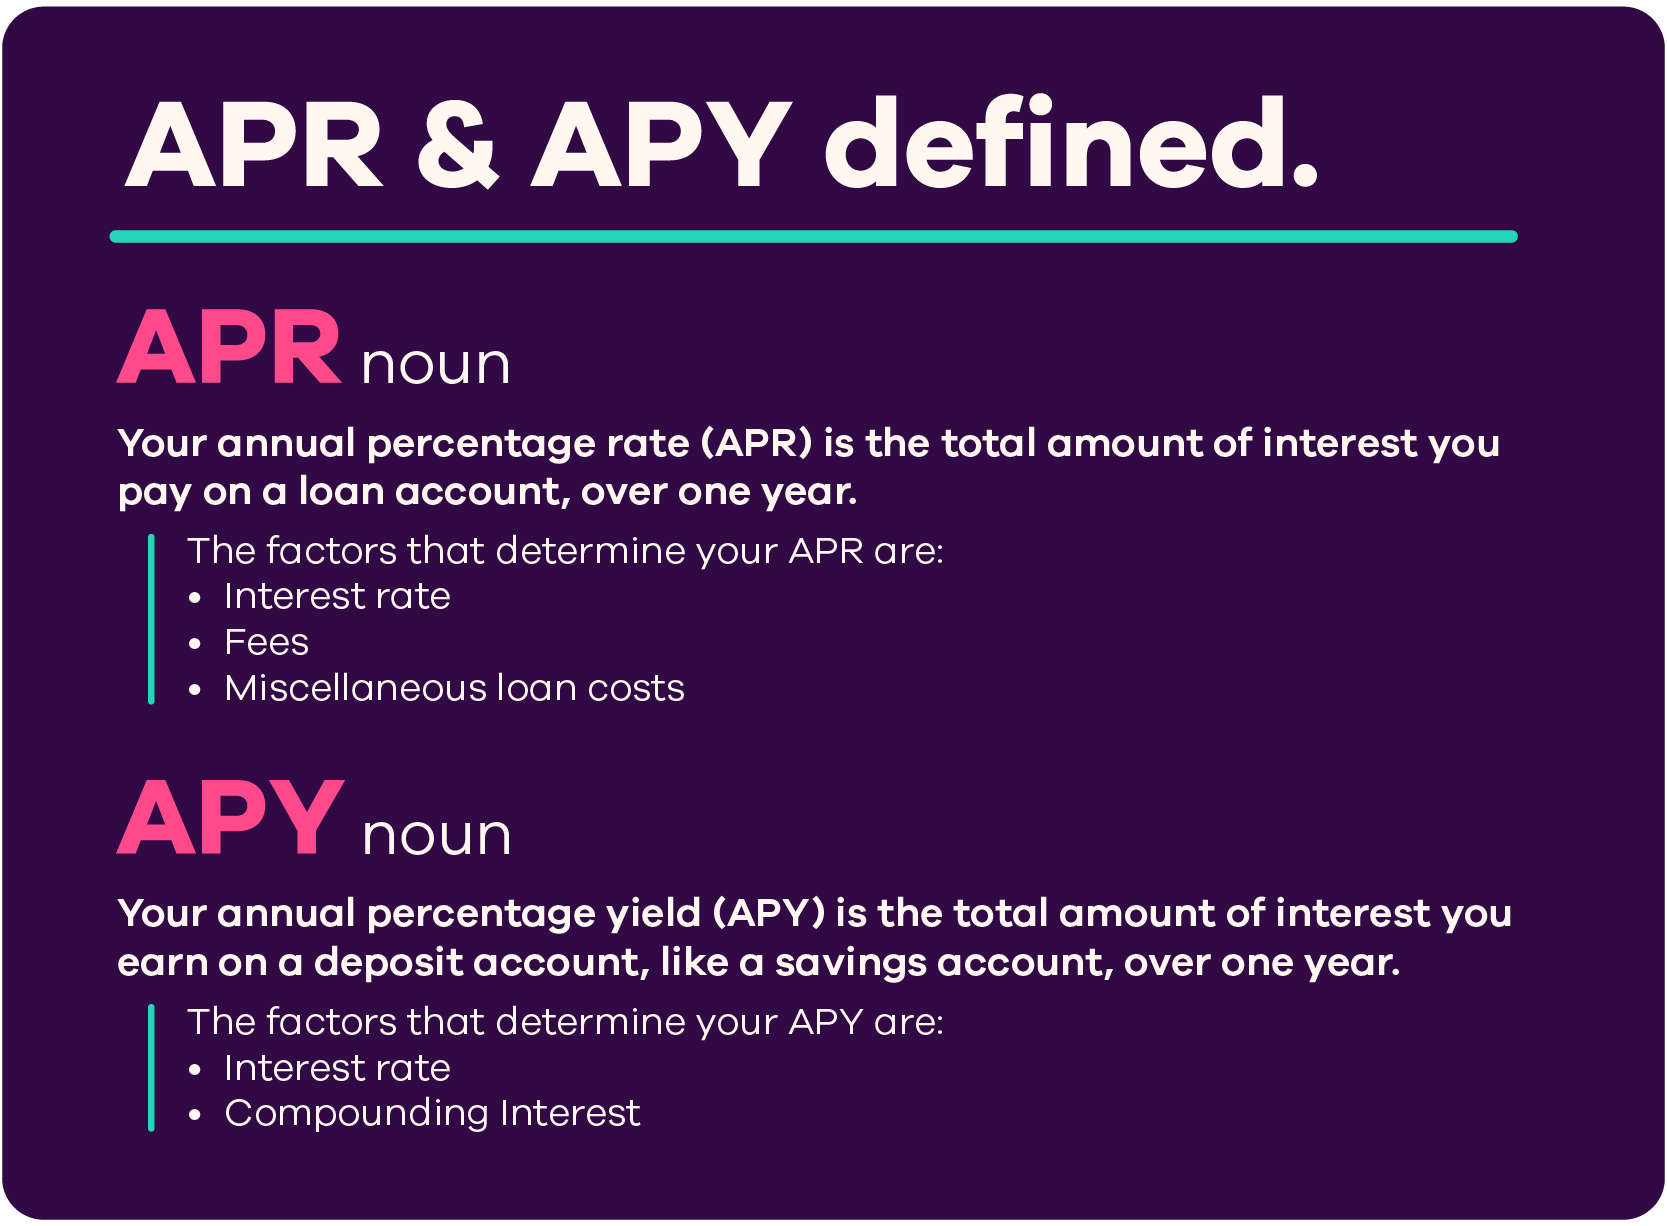 Infographic with definitions and examples of APR and APY